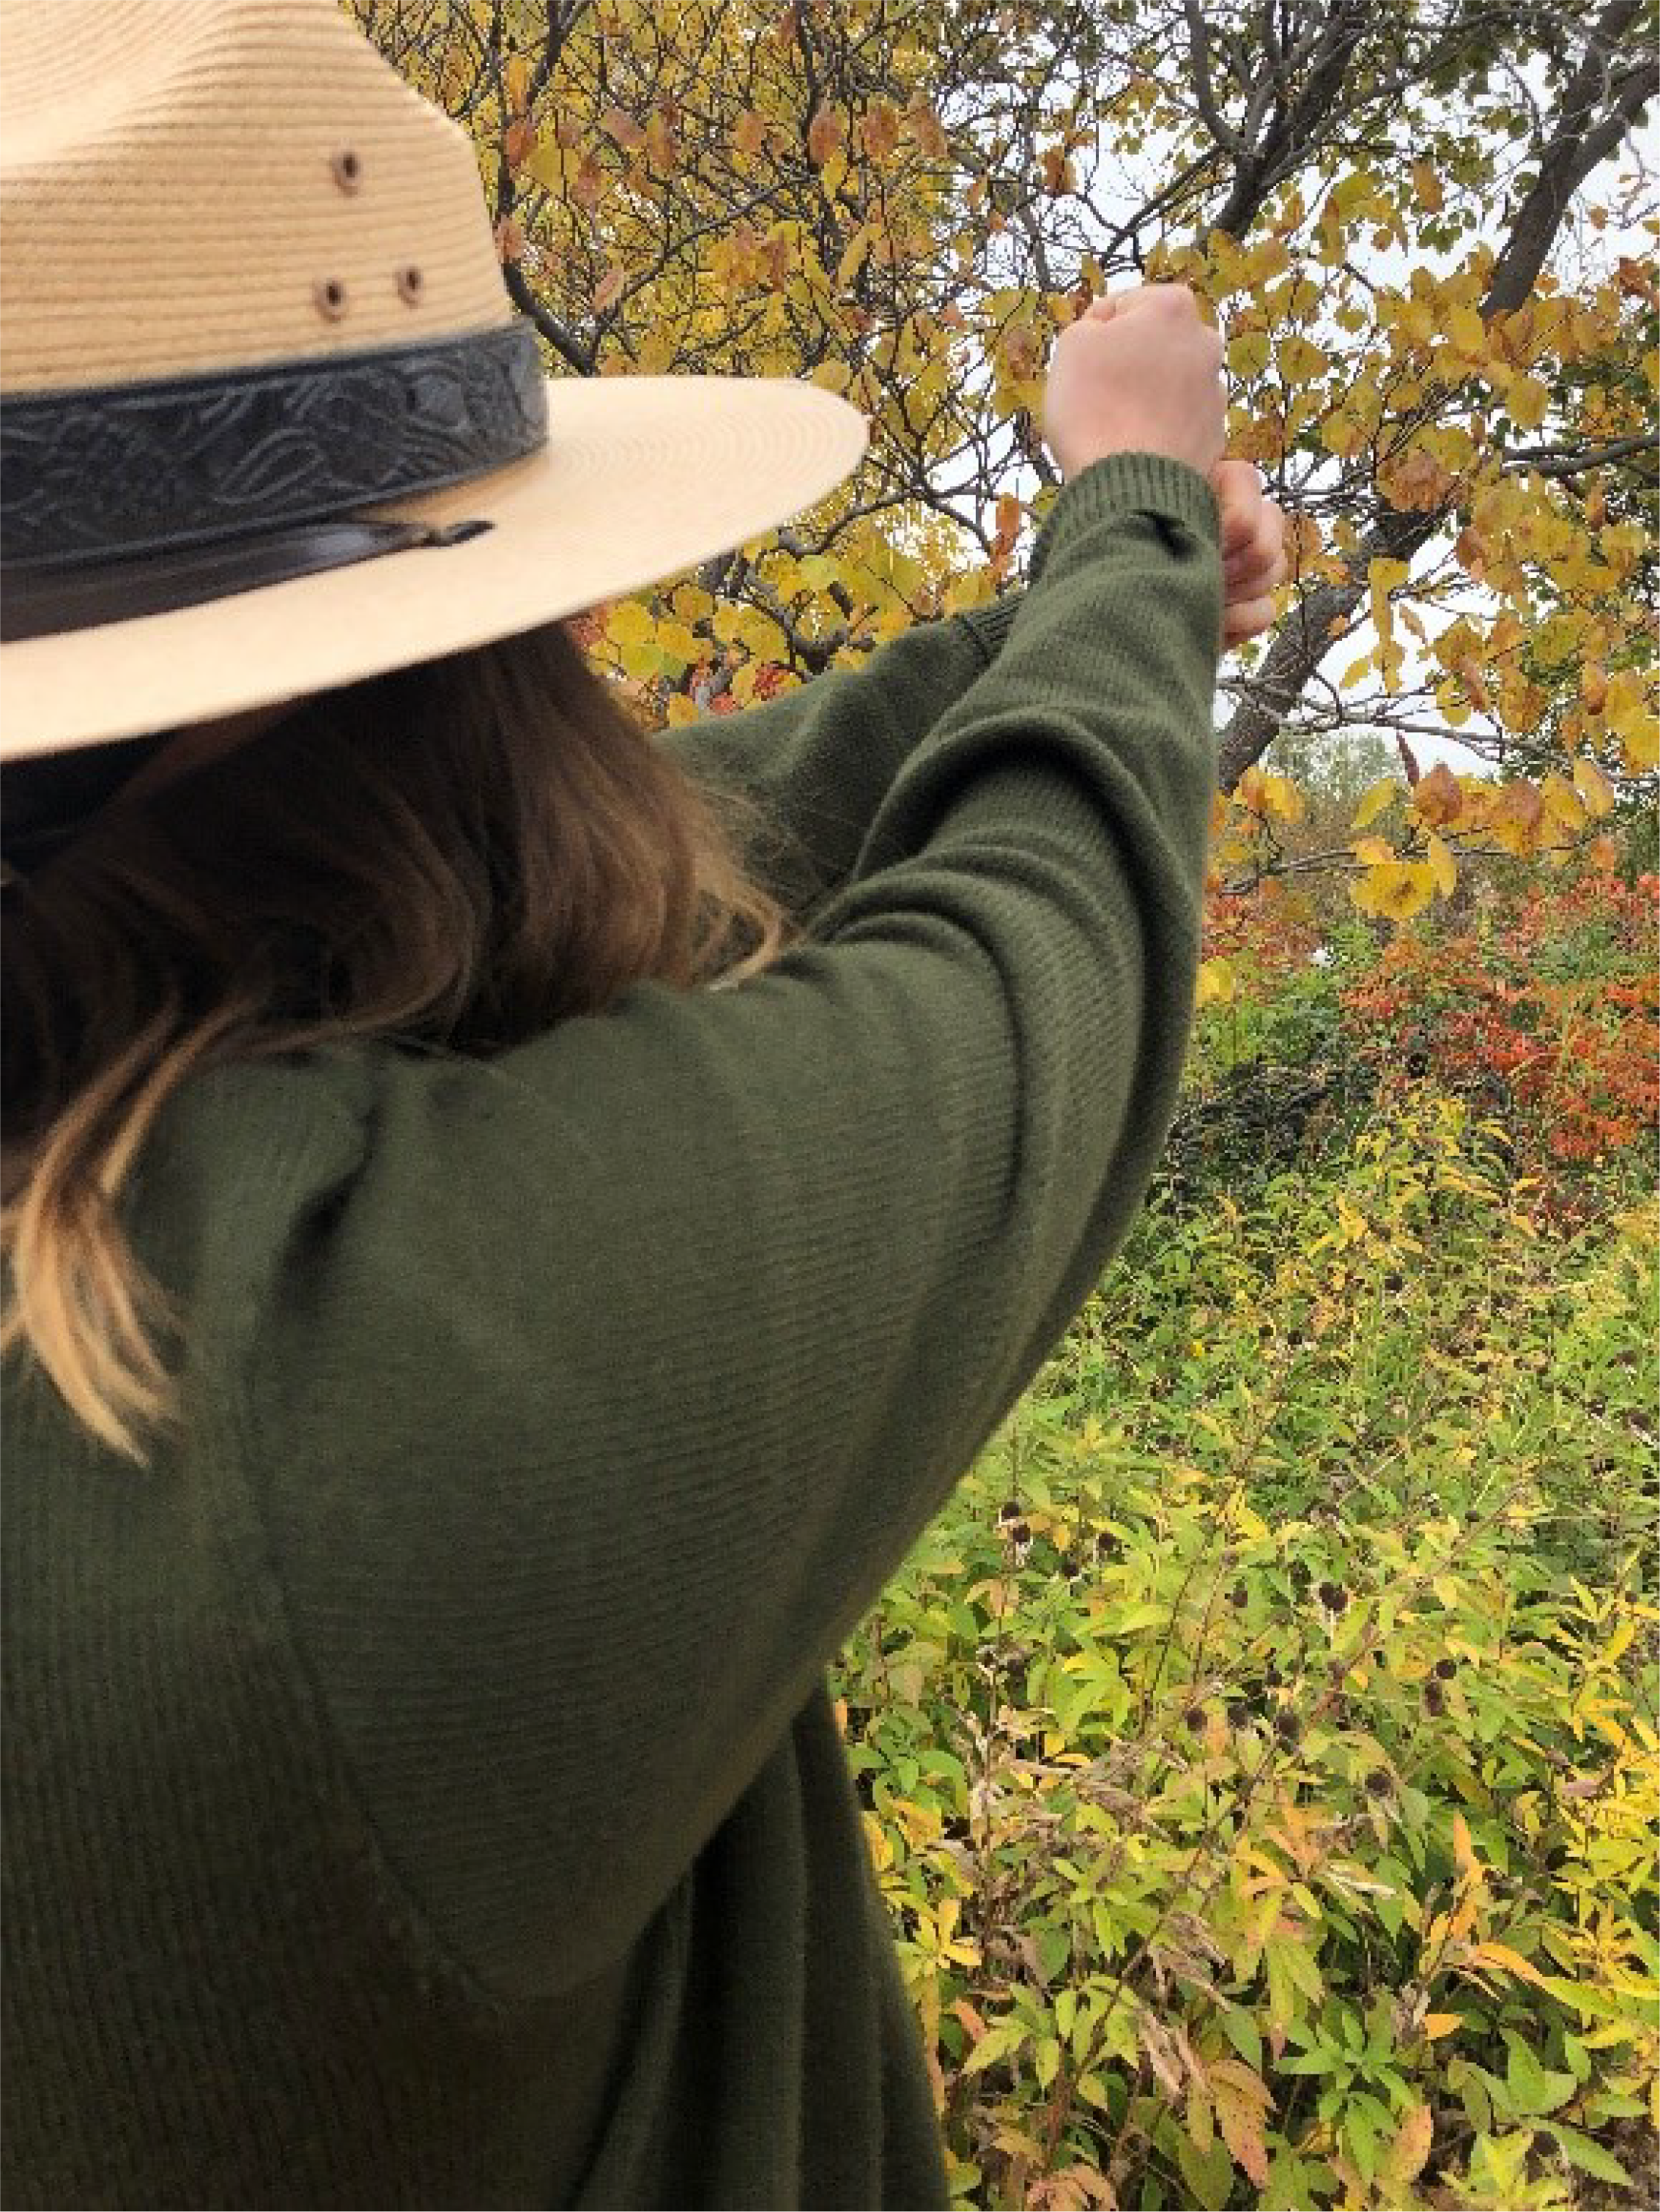 A National Park Service ranger extends both of her arms straight in front of her with one fist on top of the other. Trees with green, yellow and red leaves are in the background.